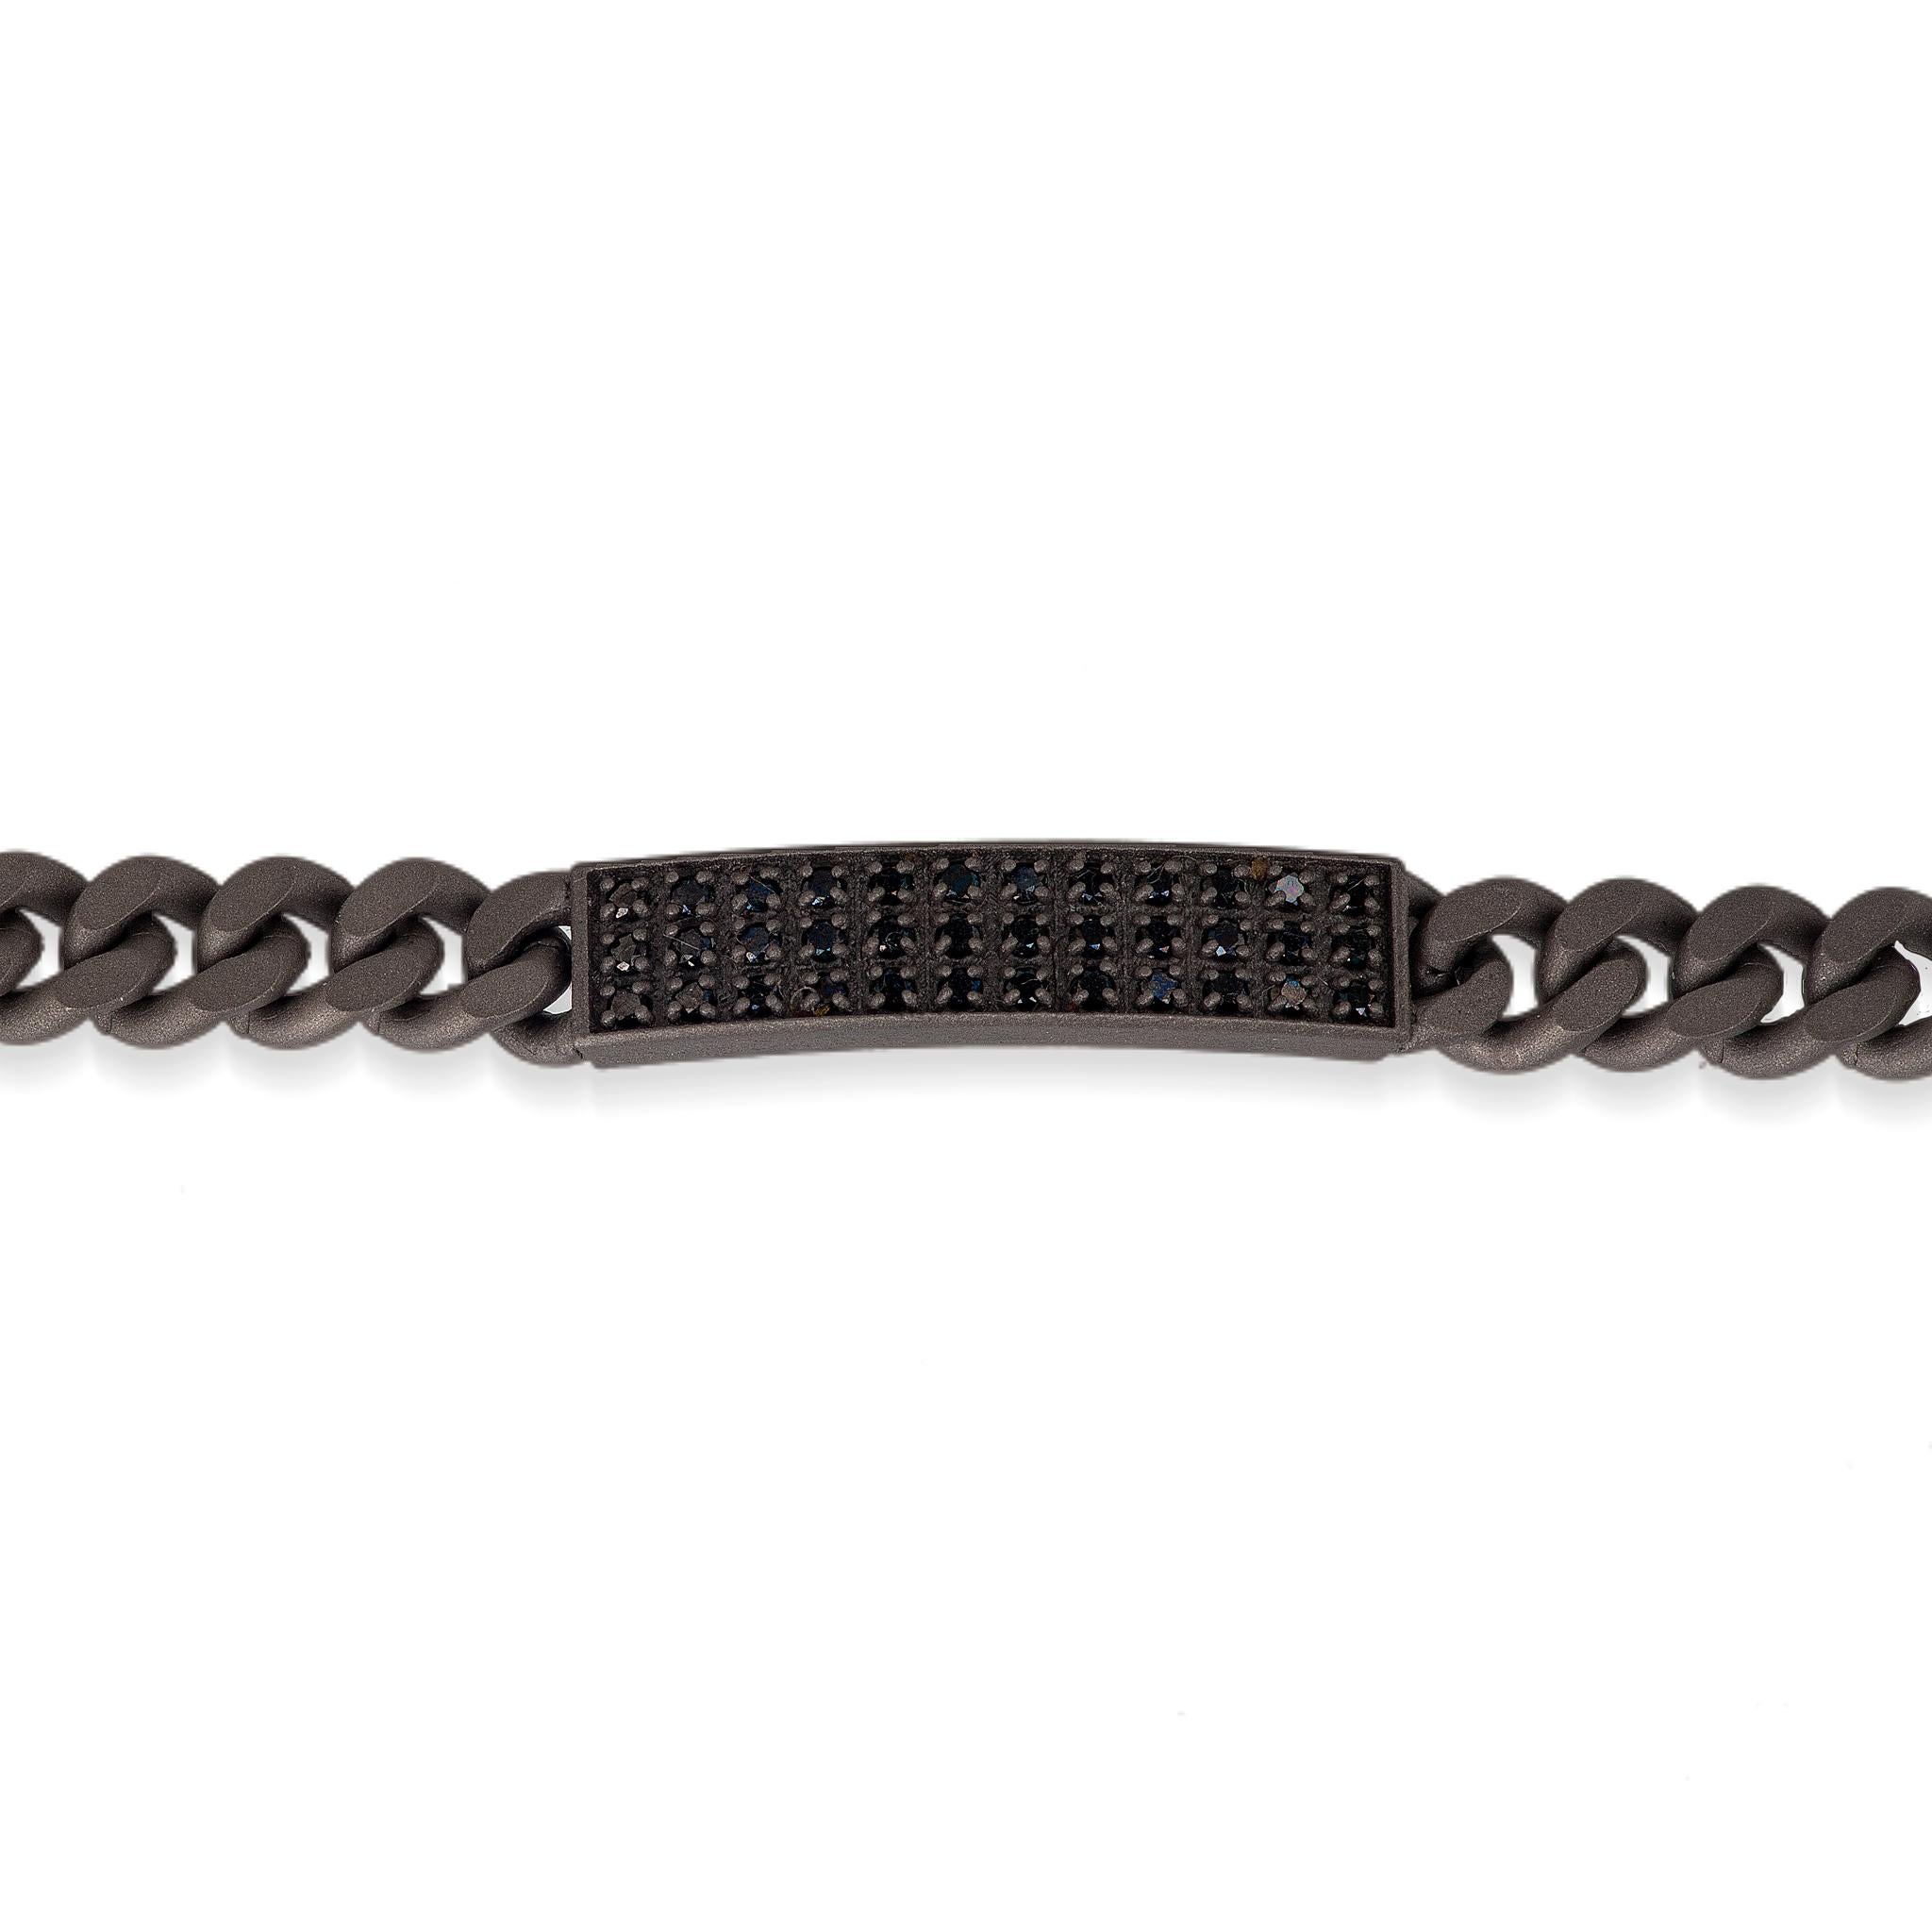 Men's groumette line bracelet in titanium, black diamonds and 18 kt red gold. Stunning bracelet with titanium groumette chain and plaque. The central plate is set with 36 black diamonds with a total carat of 0.36 ct. The bracelet ends with a